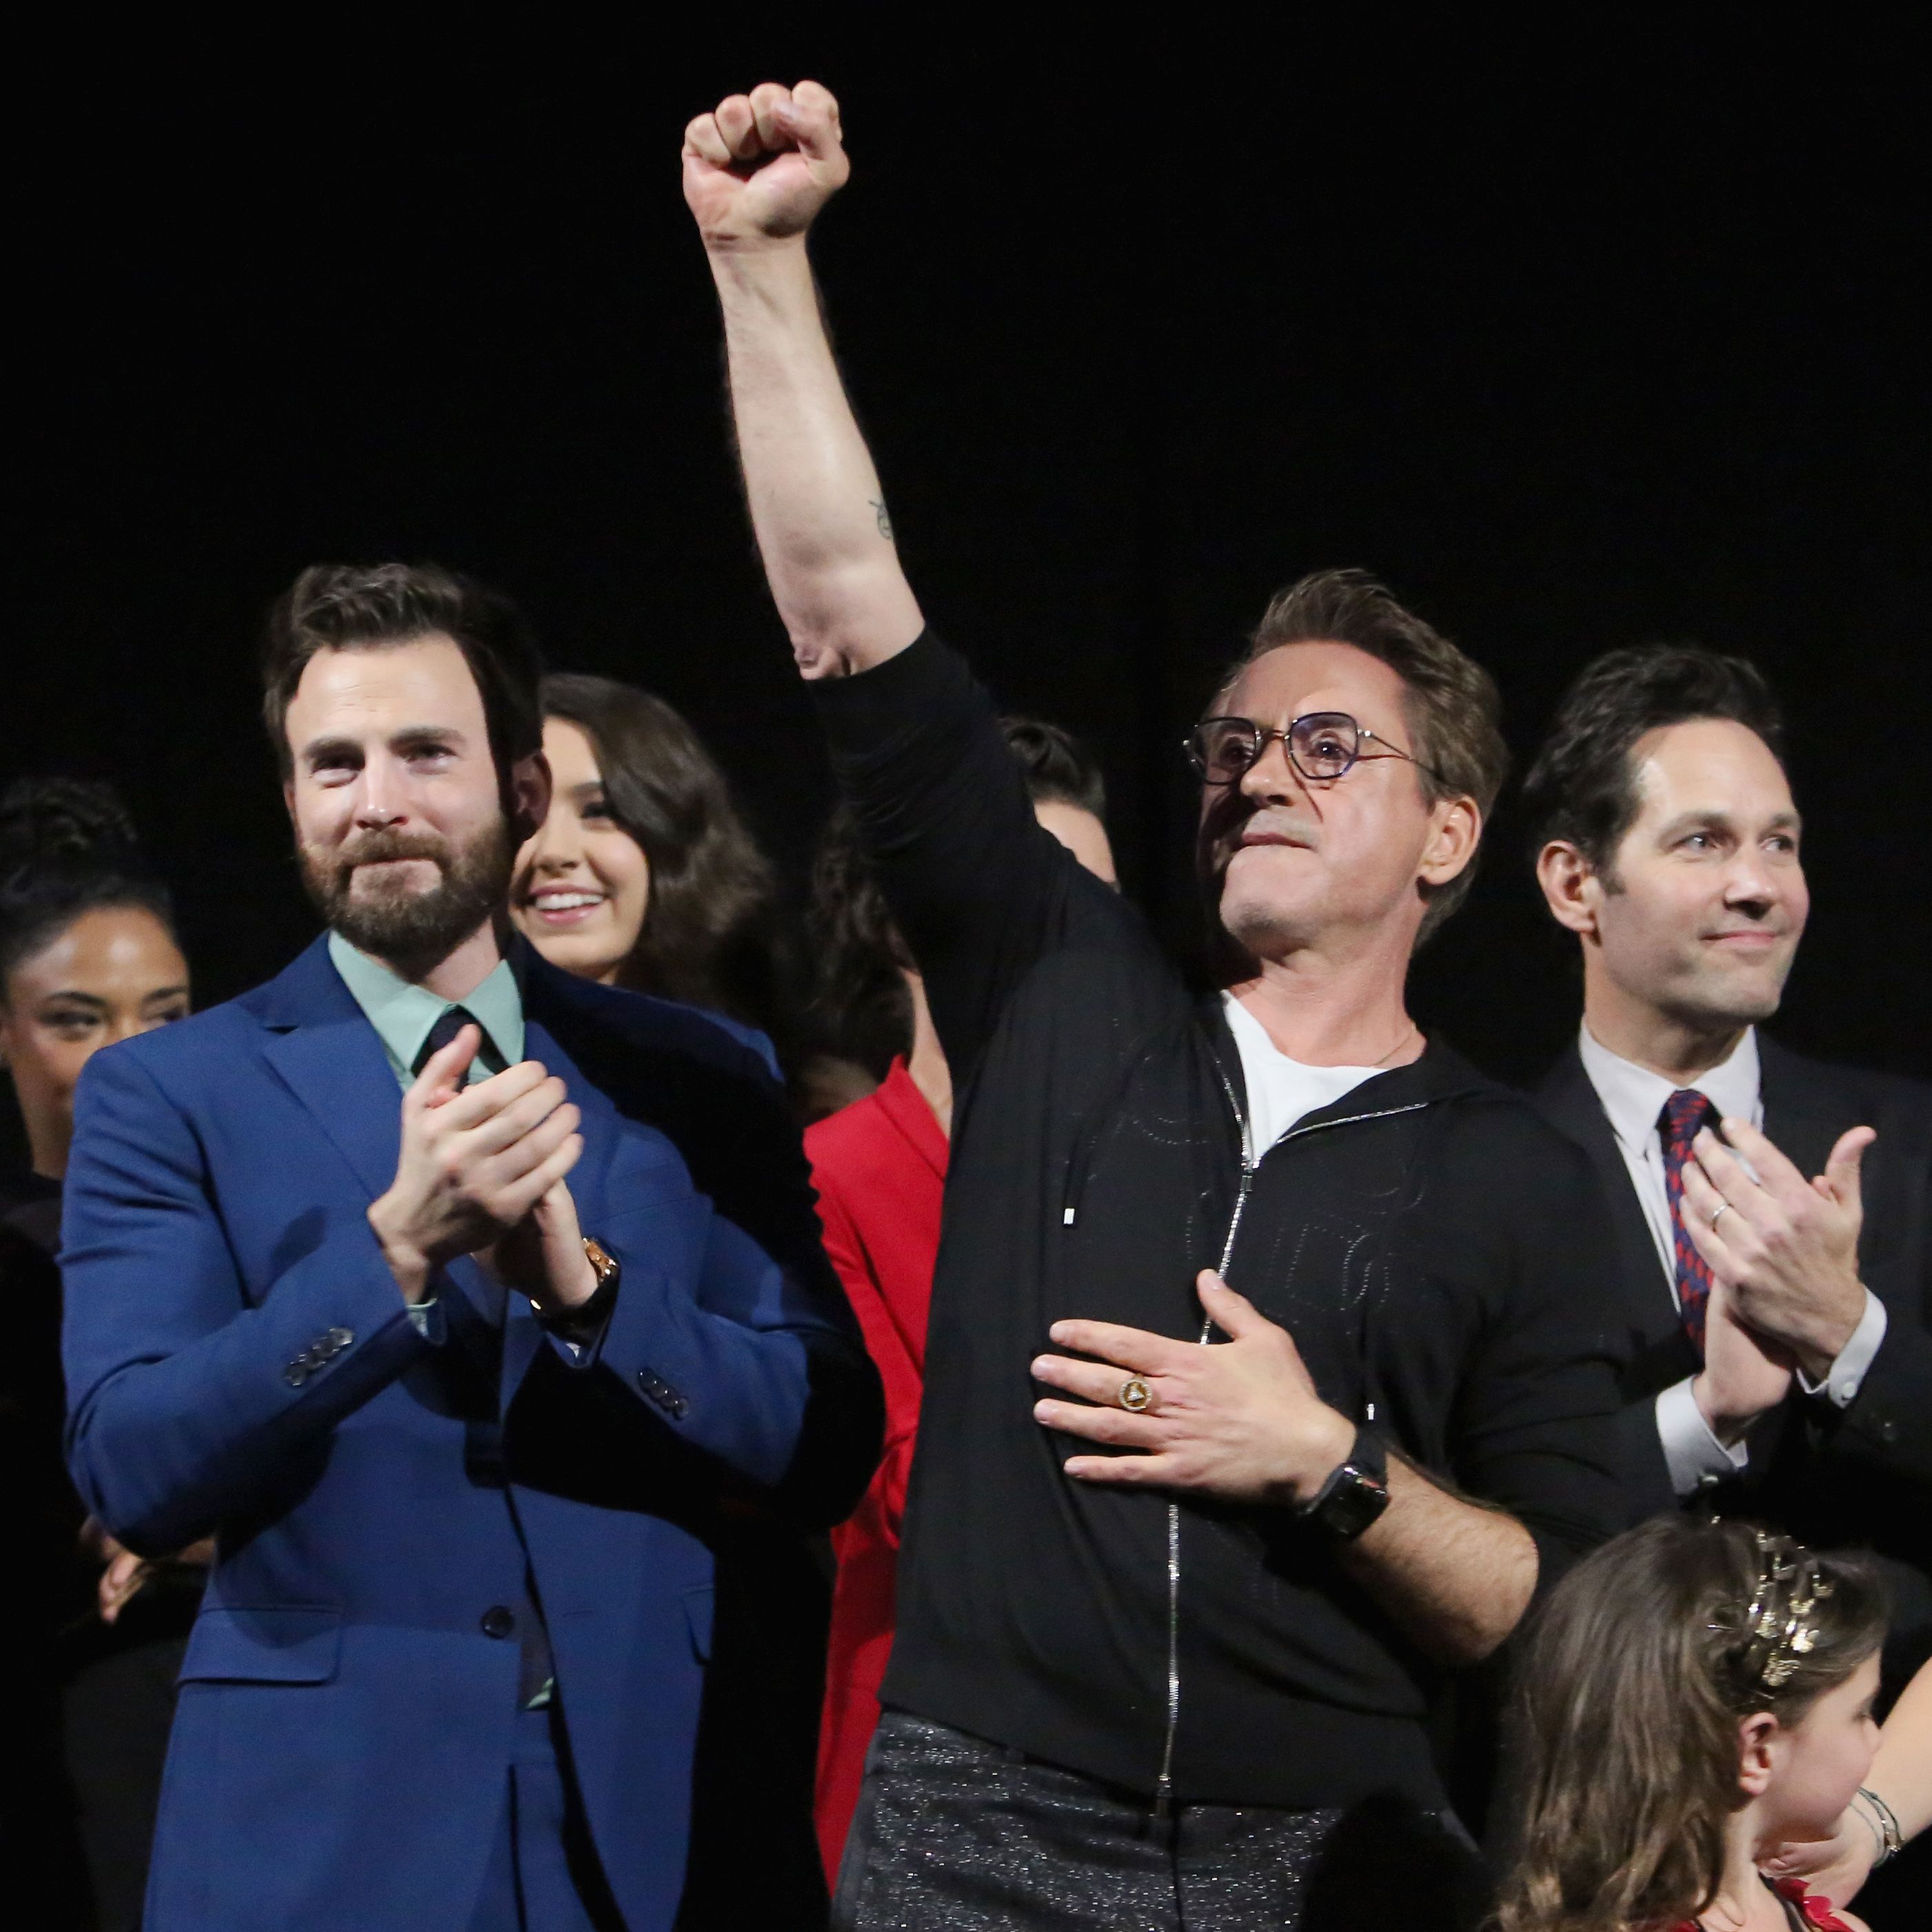 (L-R) Chris Evans and Robert Downey Jr. speak onstage during the Los Angeles World Premiere of Marvel Studios' 'Avengers: Endgame' at the Los Angeles Convention Center on April 23, 2019 in Los Angeles, California.